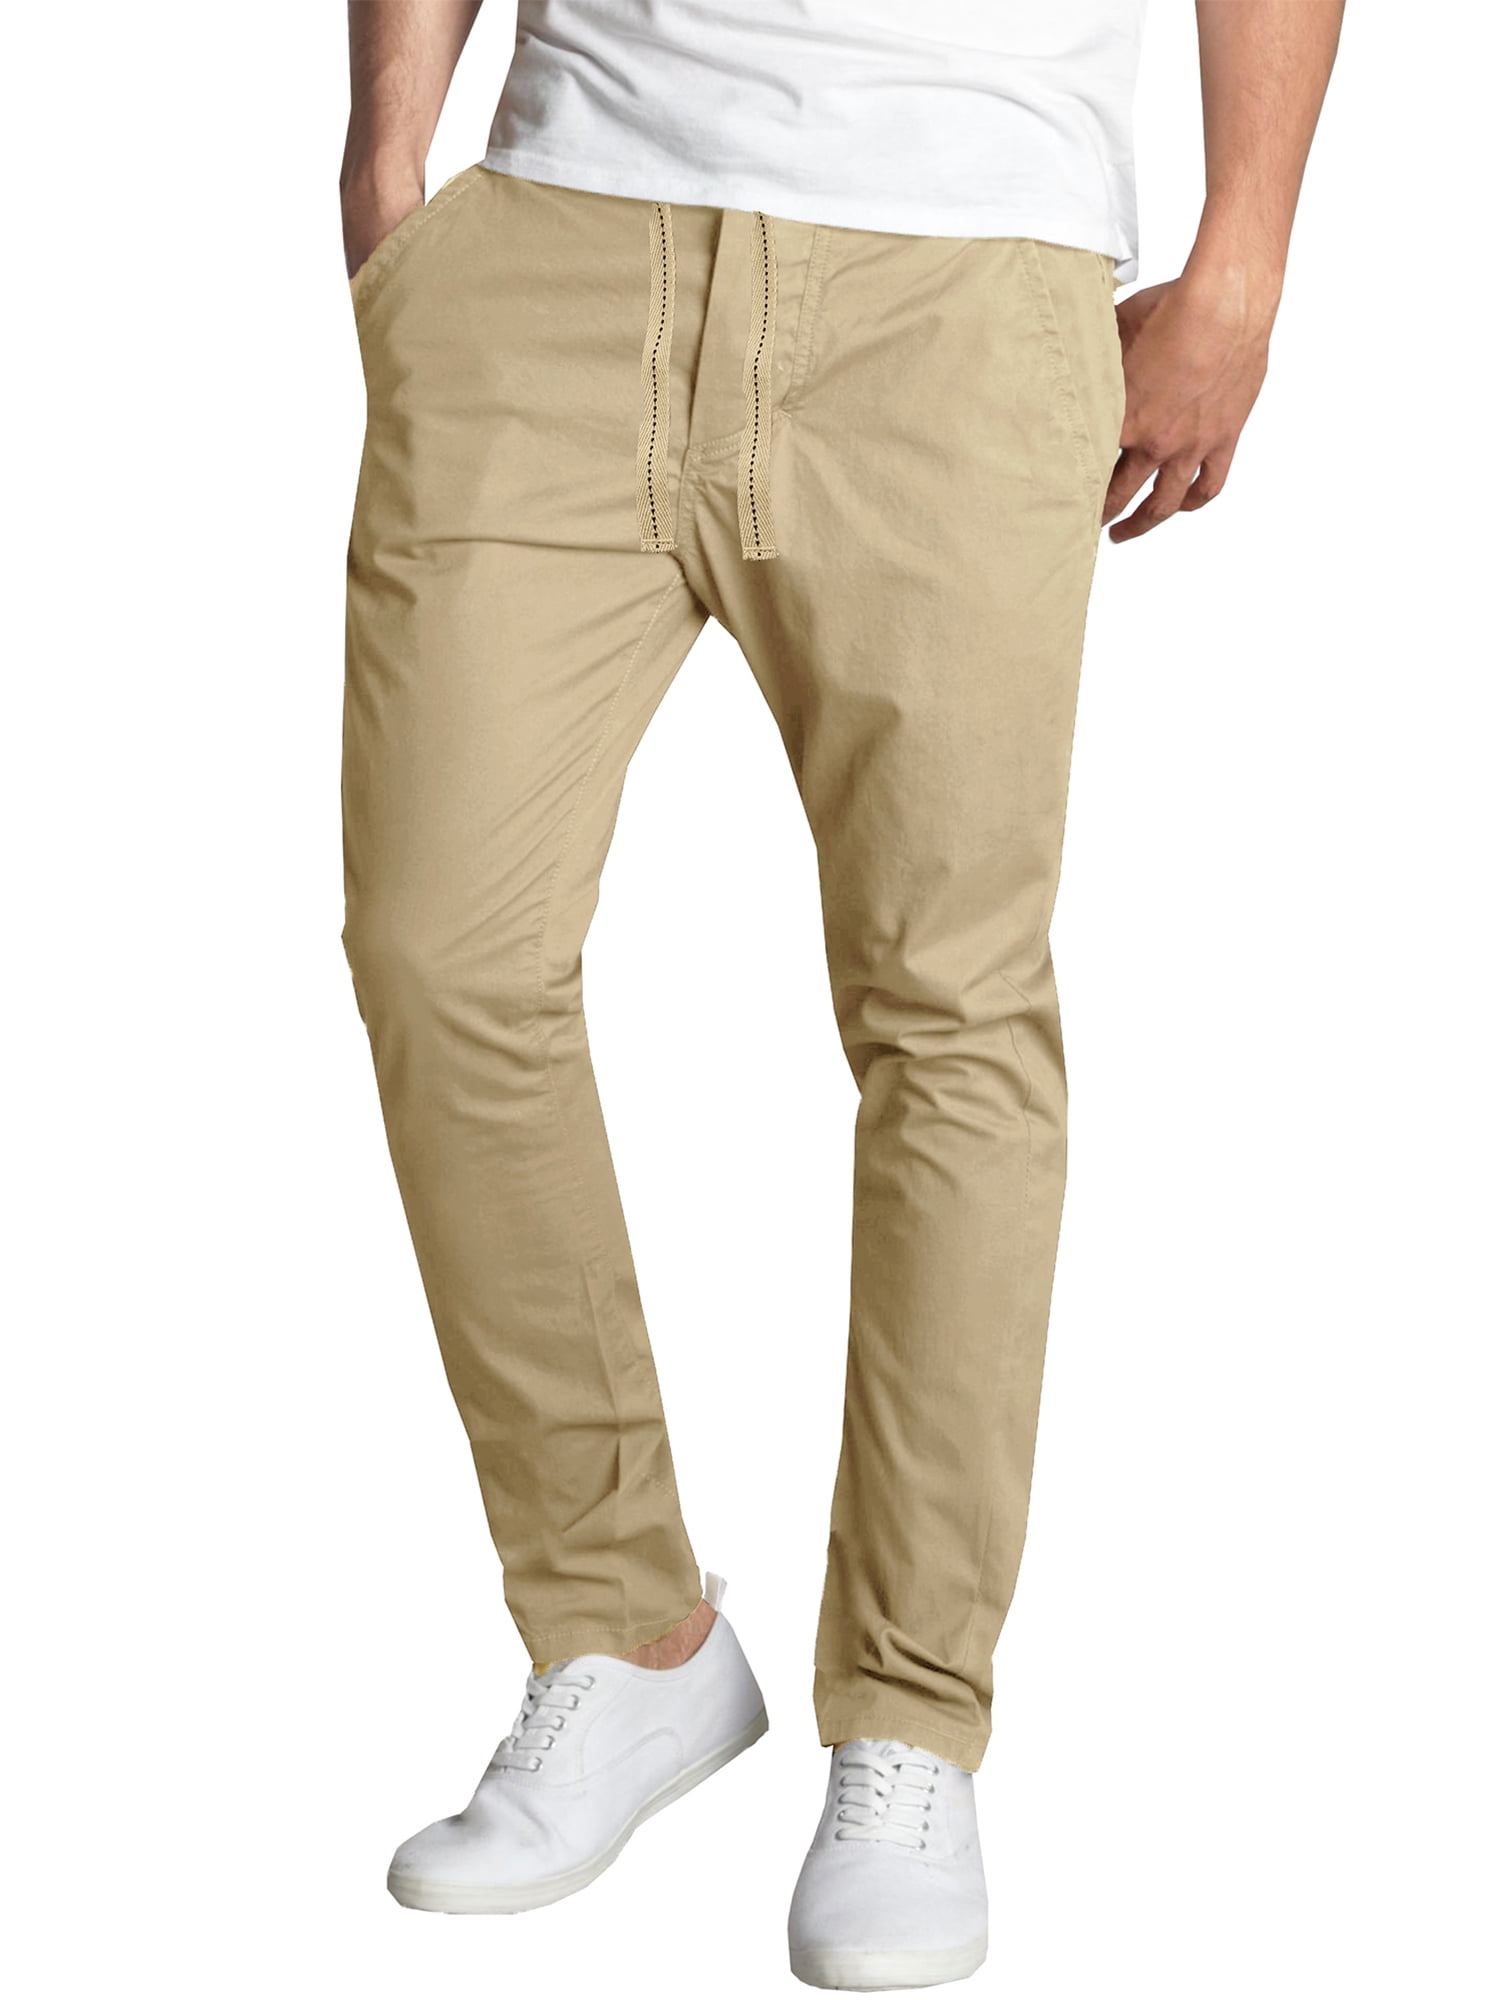 GBH Men's Joggers Chino Pants Stretch Twill Slim Fit, Sizes S-XL ...